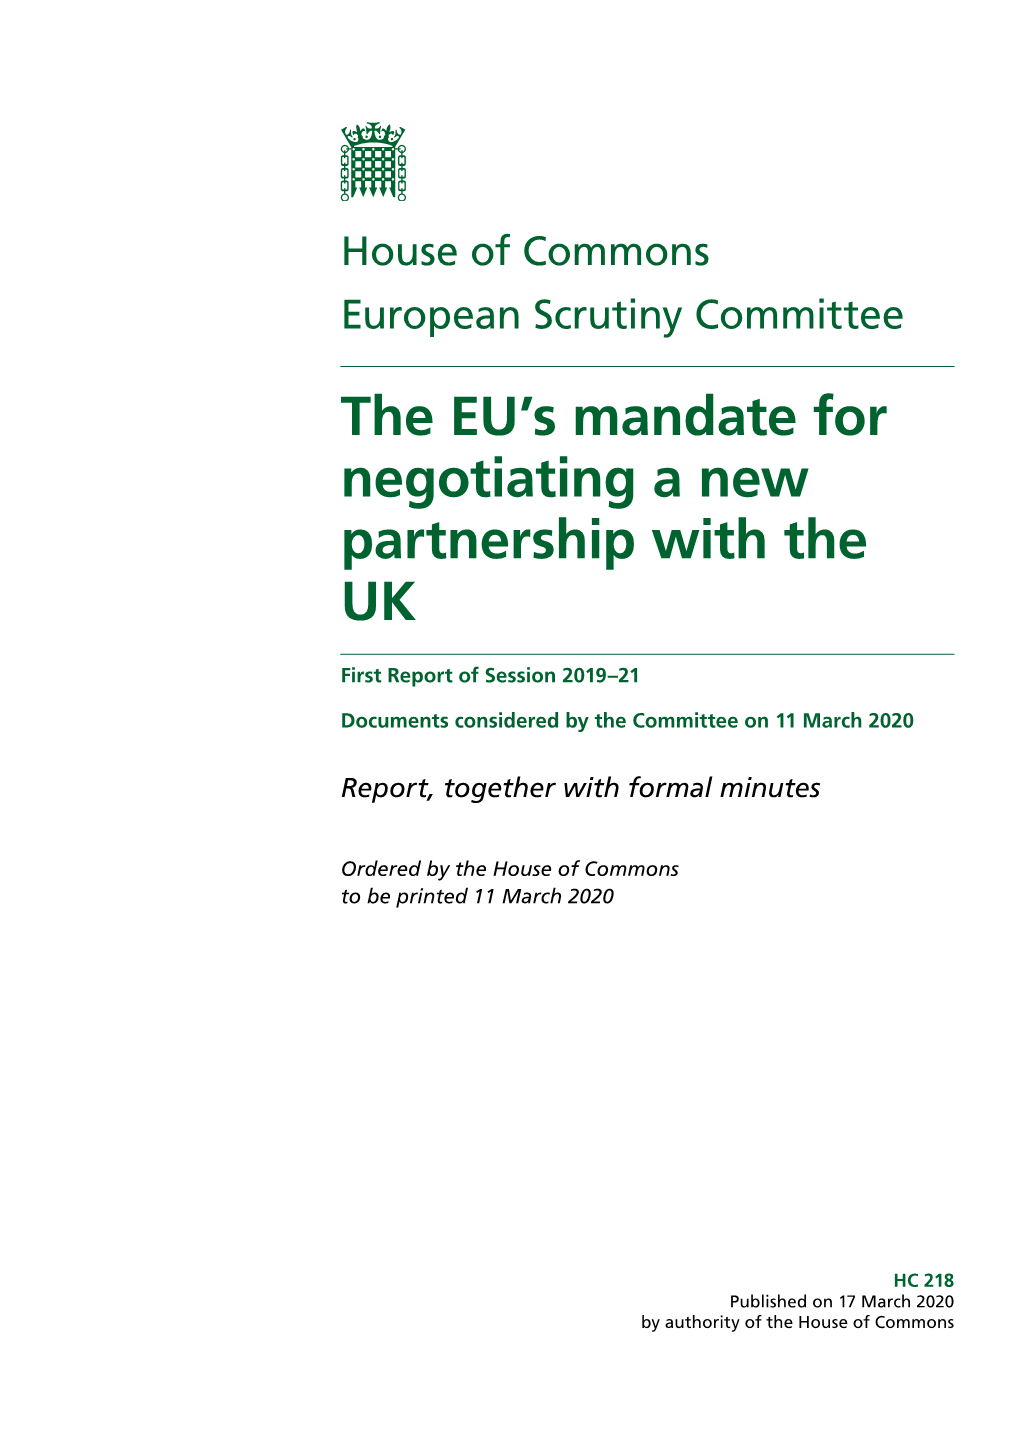 The EU's Mandate for Negotiating a New Partnership with the UK